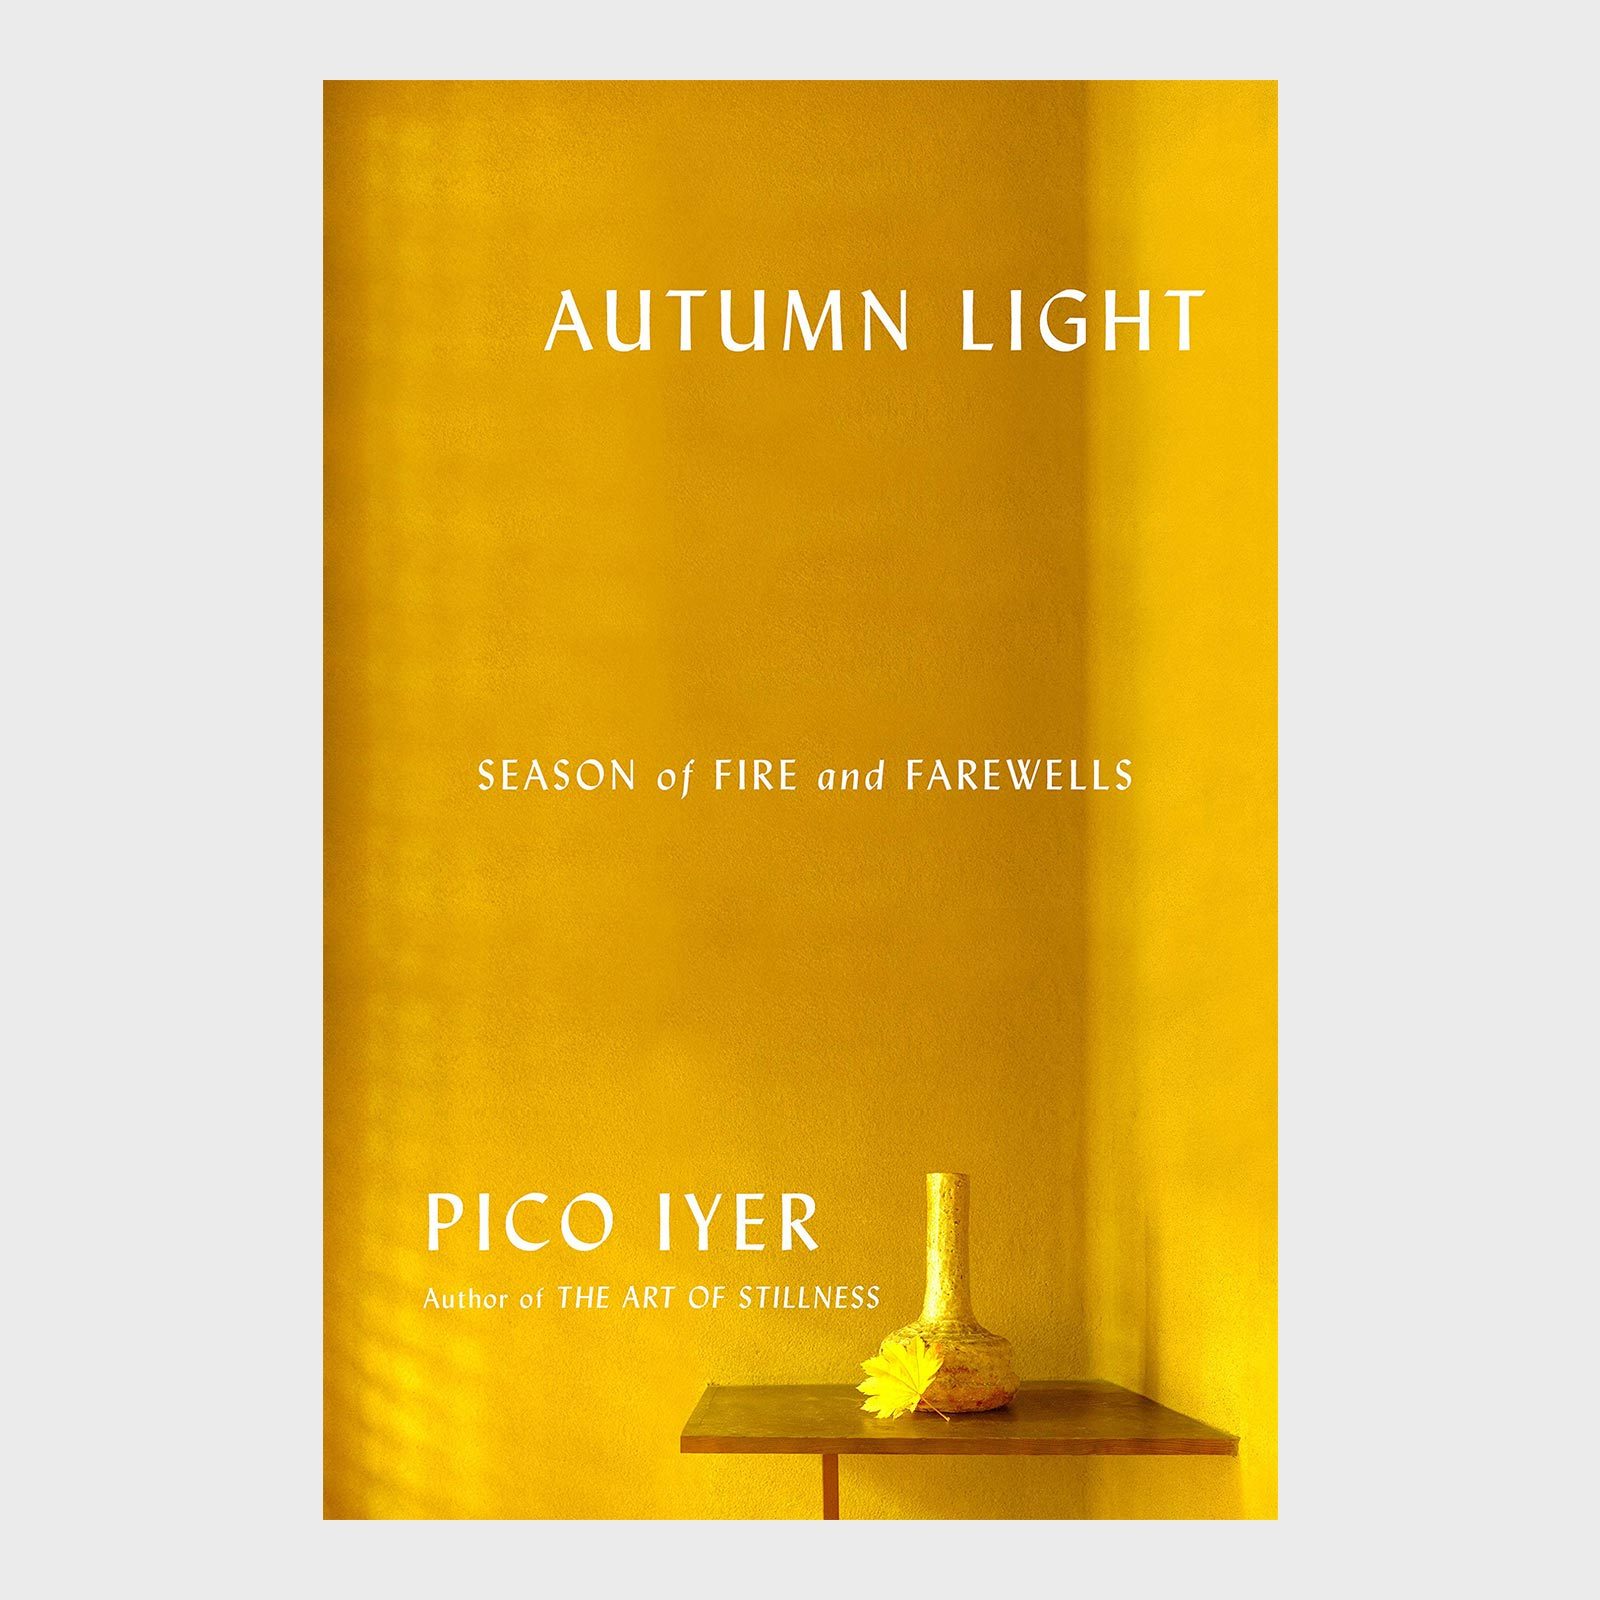 <h3><em>Autumn Light </em>by Pico Iyer</h3> <p><strong>Setting:</strong> Japan</p> <p>At first glance, a book called <a href="https://www.amazon.com/Autumn-Light-Season-Fire-Farewells/dp/0451493931" rel="noopener noreferrer"><em>Autumn Light</em></a> doesn't seem like the right fit for any summertime reading you may have planned. But the season you read this book doesn't matter a bit. There's so much going on below the surface, especially if you're craving the tranquility of a trip to Japan. Pico Iyer's 2019 memoir describes his return to Japan to attend to and process a loved one's death. He steps back into ordinary Japanese life and gently, graciously invites his readers along. You'll find yourself reflecting on age, life, death and the <a href="https://www.rd.com/list/inspirational-poems/" rel="noopener noreferrer">poetry</a> of daily rituals. It's a quiet book but also a beautiful, transportive mental journey to somewhere far away.</p> <p class="listicle-page__cta-button-shop"><a class="shop-btn" href="https://www.amazon.com/Autumn-Light-Season-Fire-Farewells/dp/0451493931">Shop Now</a></p>